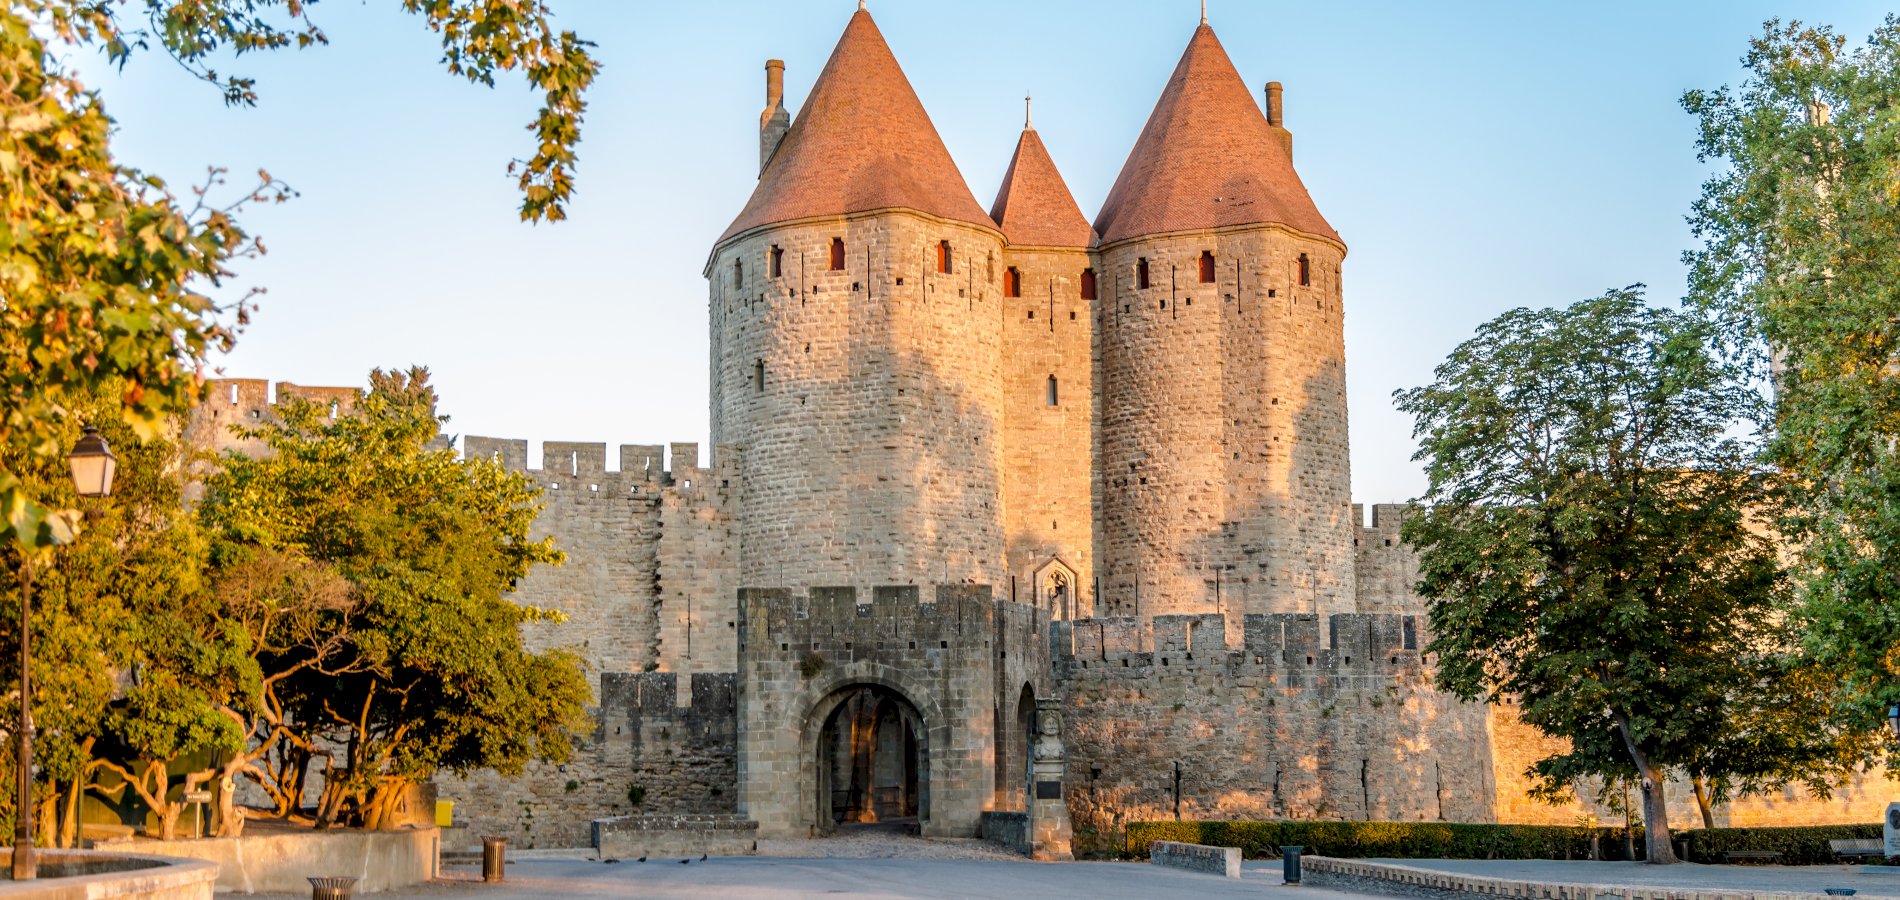 Ophorus Tours - Carcassonne & Languedoc Wines Private Shore Excursion From Port Vendres